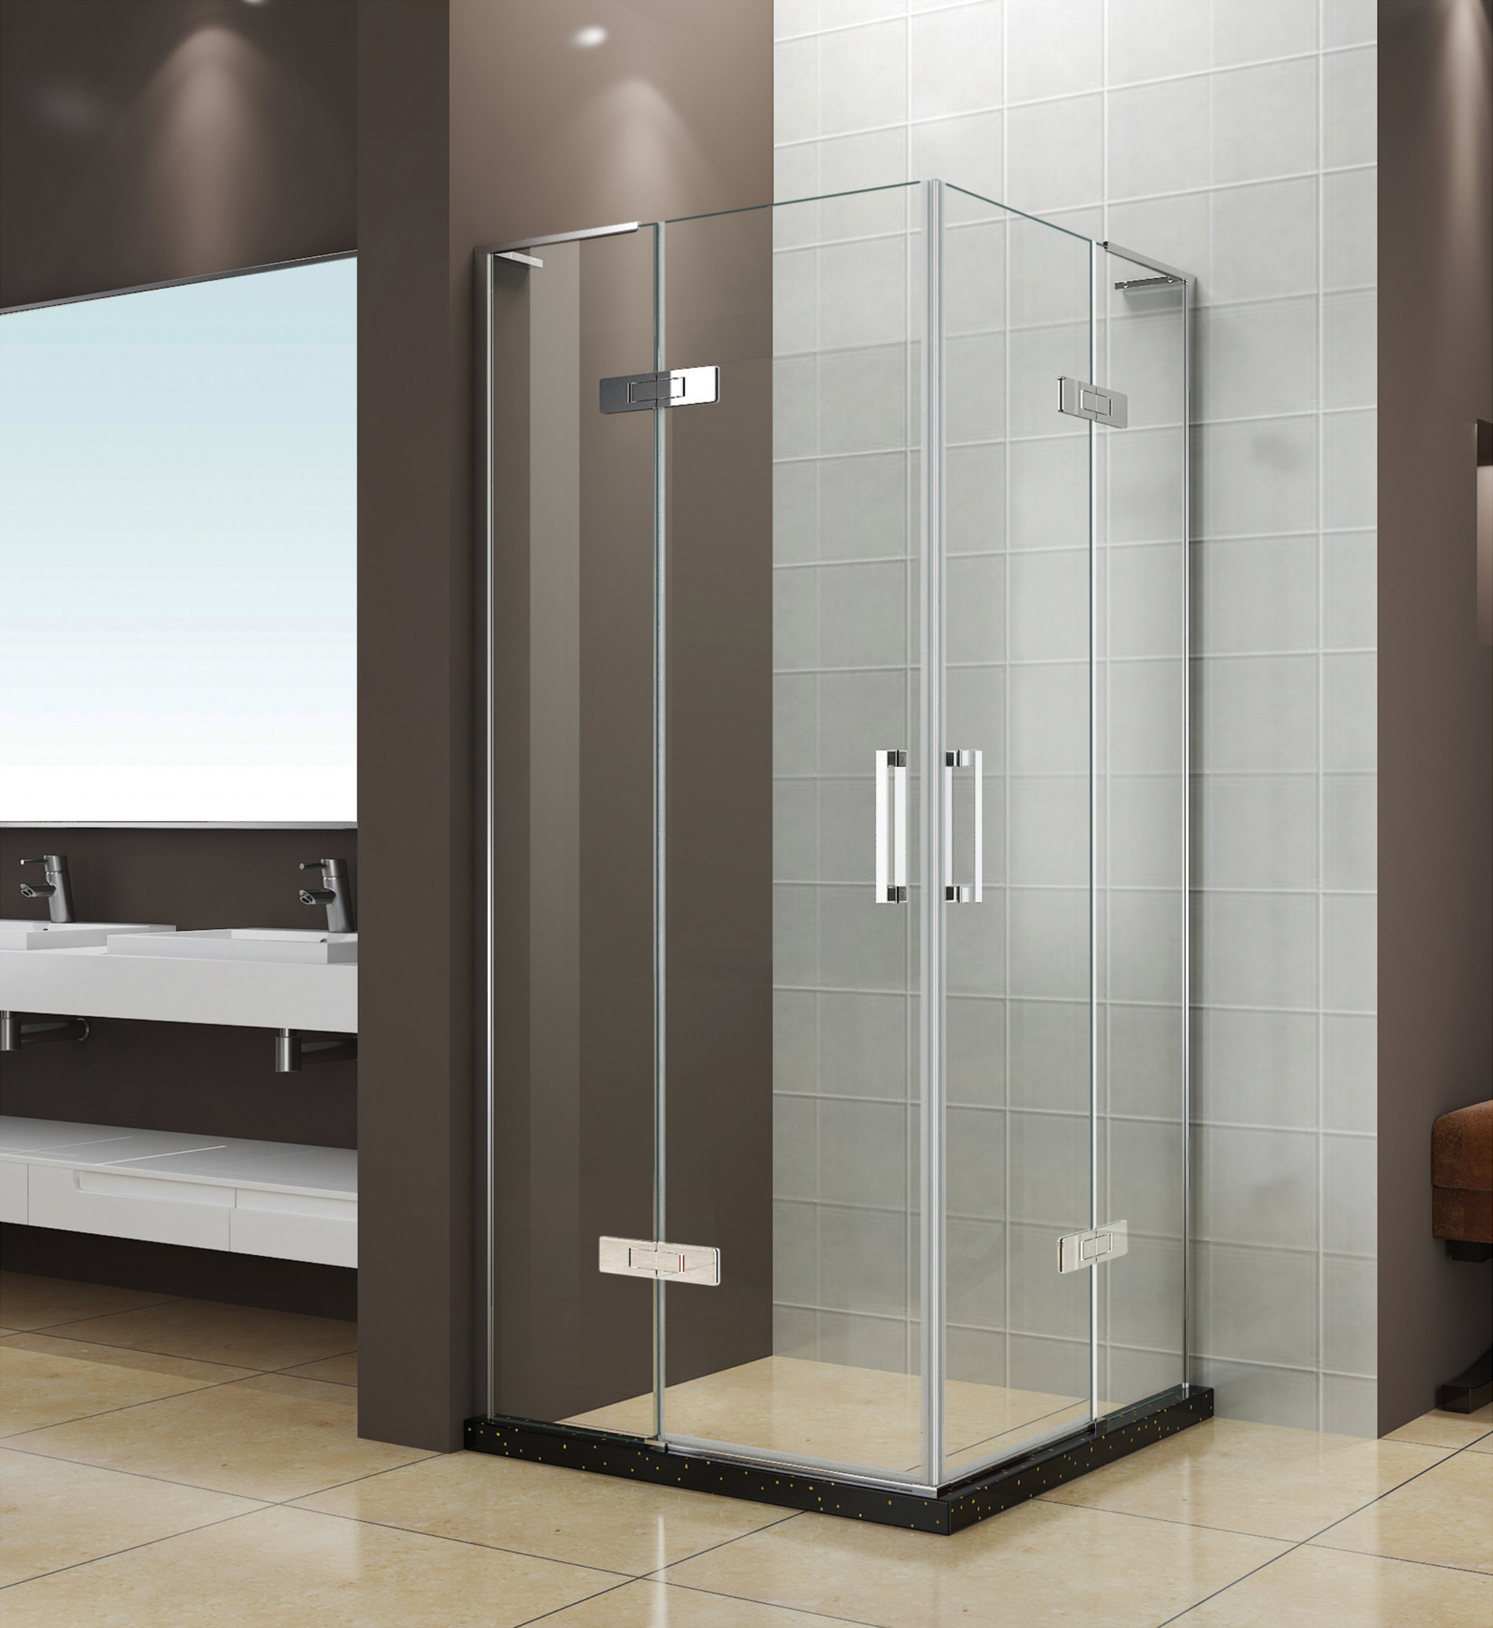  2020 New Bathroom Shower Doors Walk in Style Transparency Clearly Glass with Black Tray